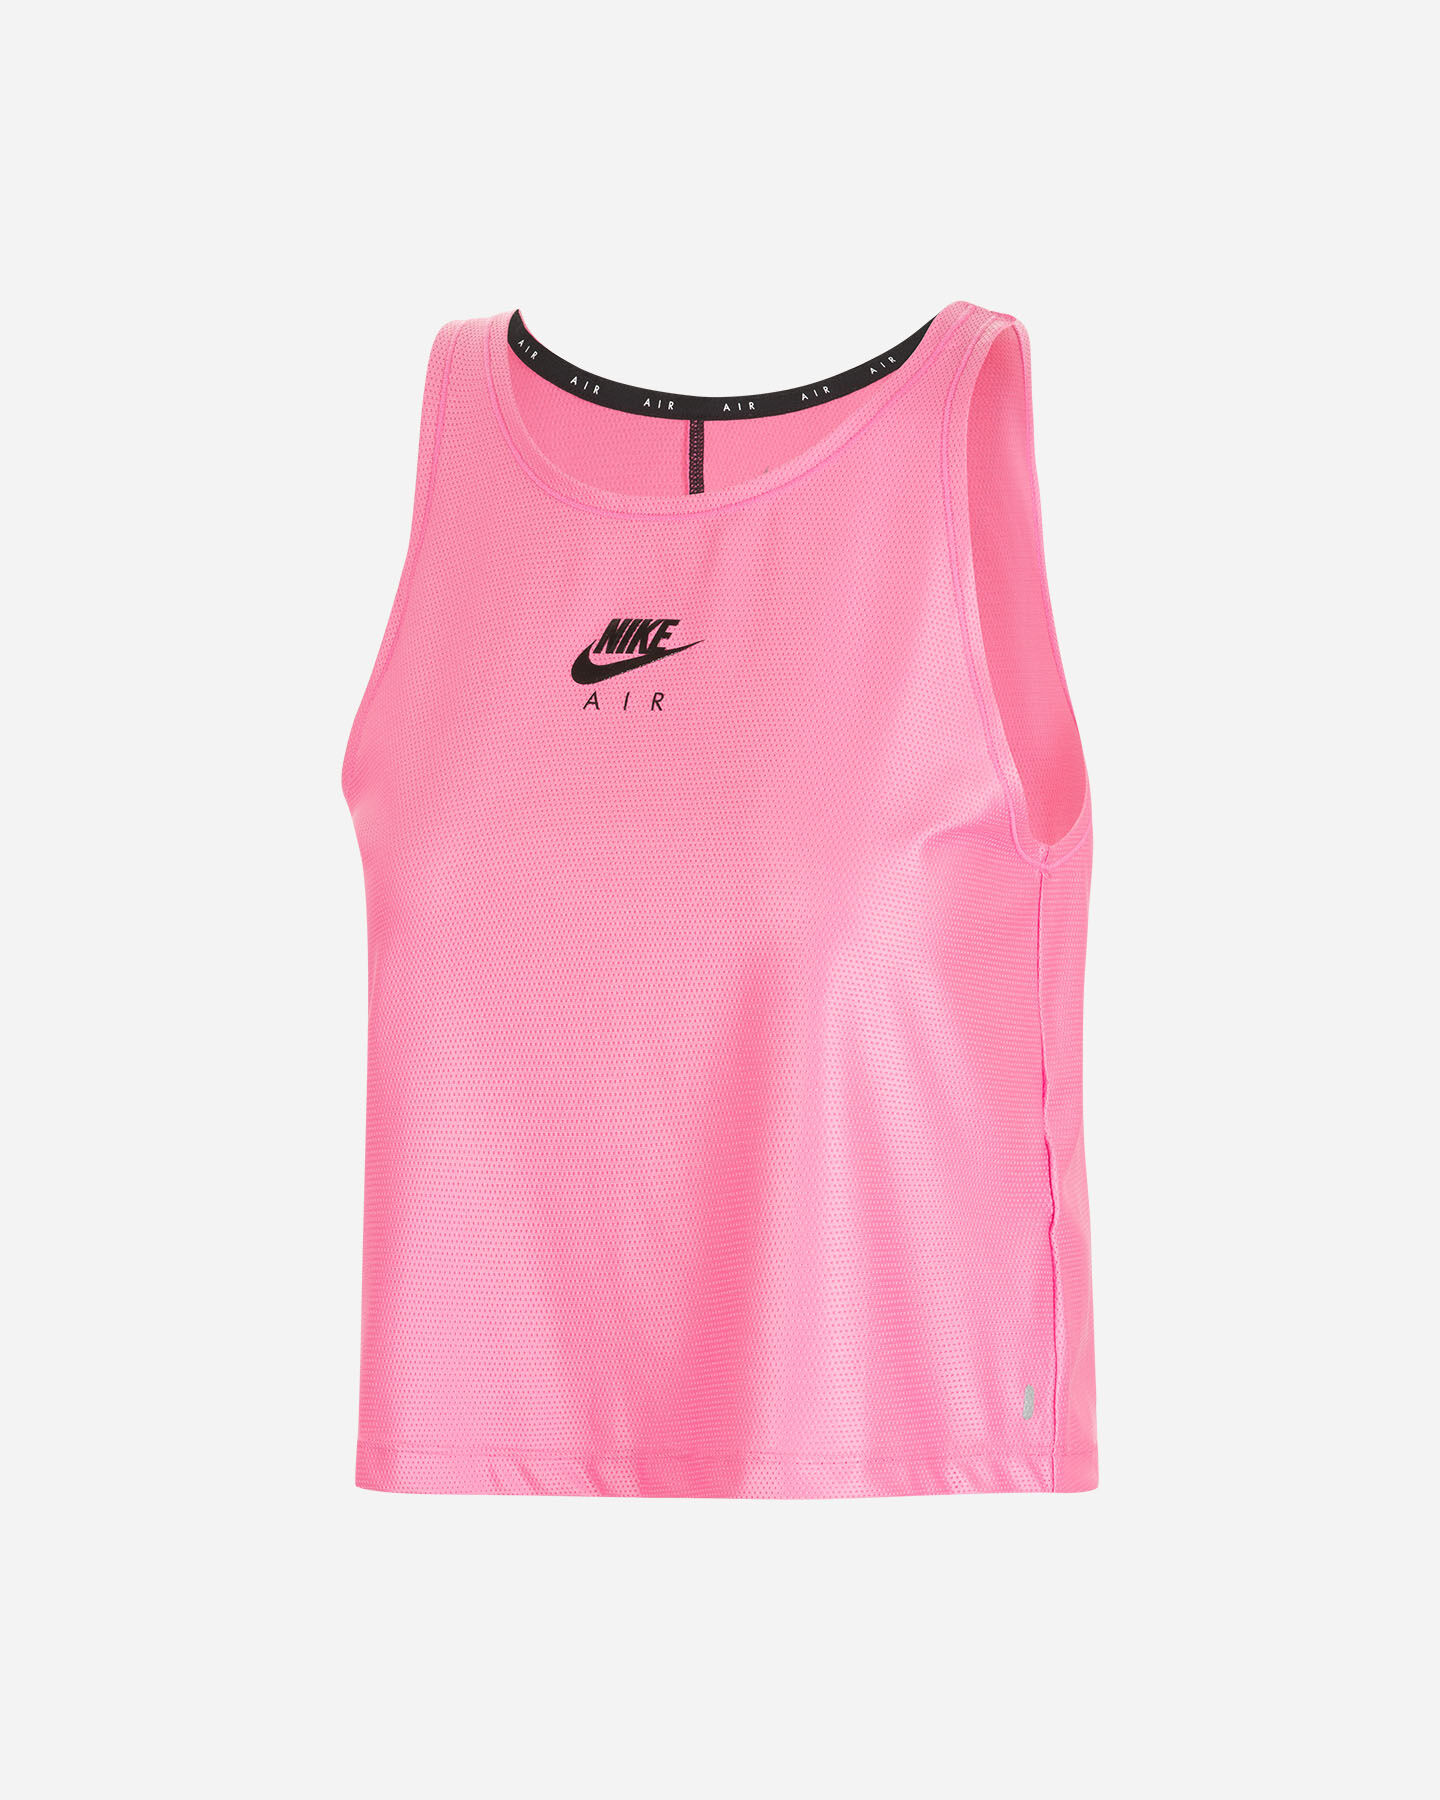  Canotta running NIKE AIR TANK ROSA W S5225296 scatto 0